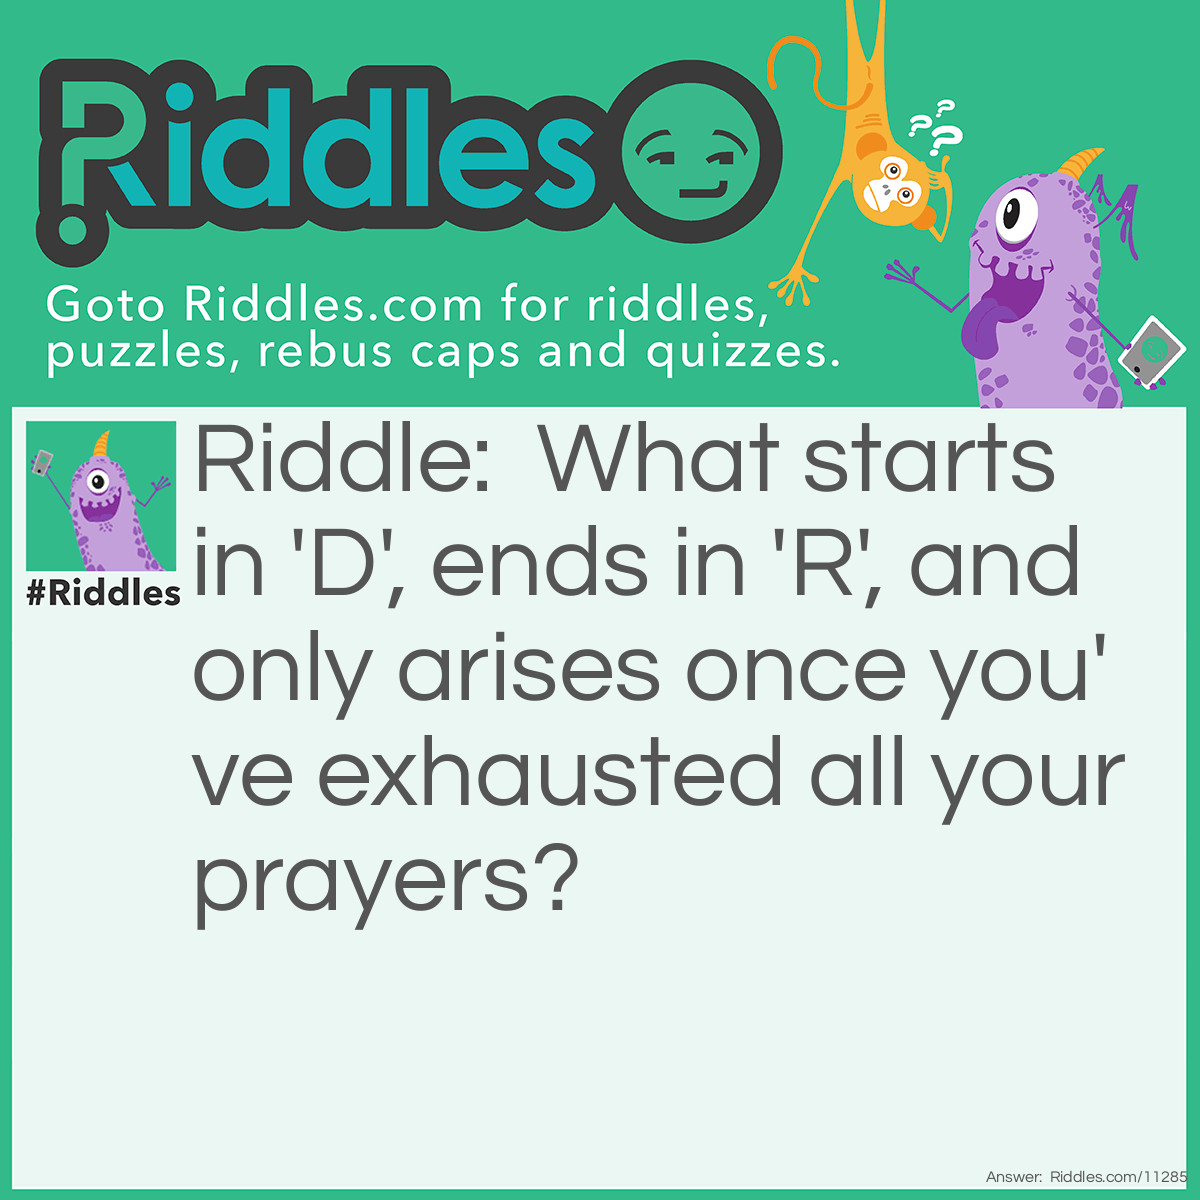 Riddle: What starts in 'D', ends in 'R', and only arises once you've exhausted all your prayers? Answer: Despair.